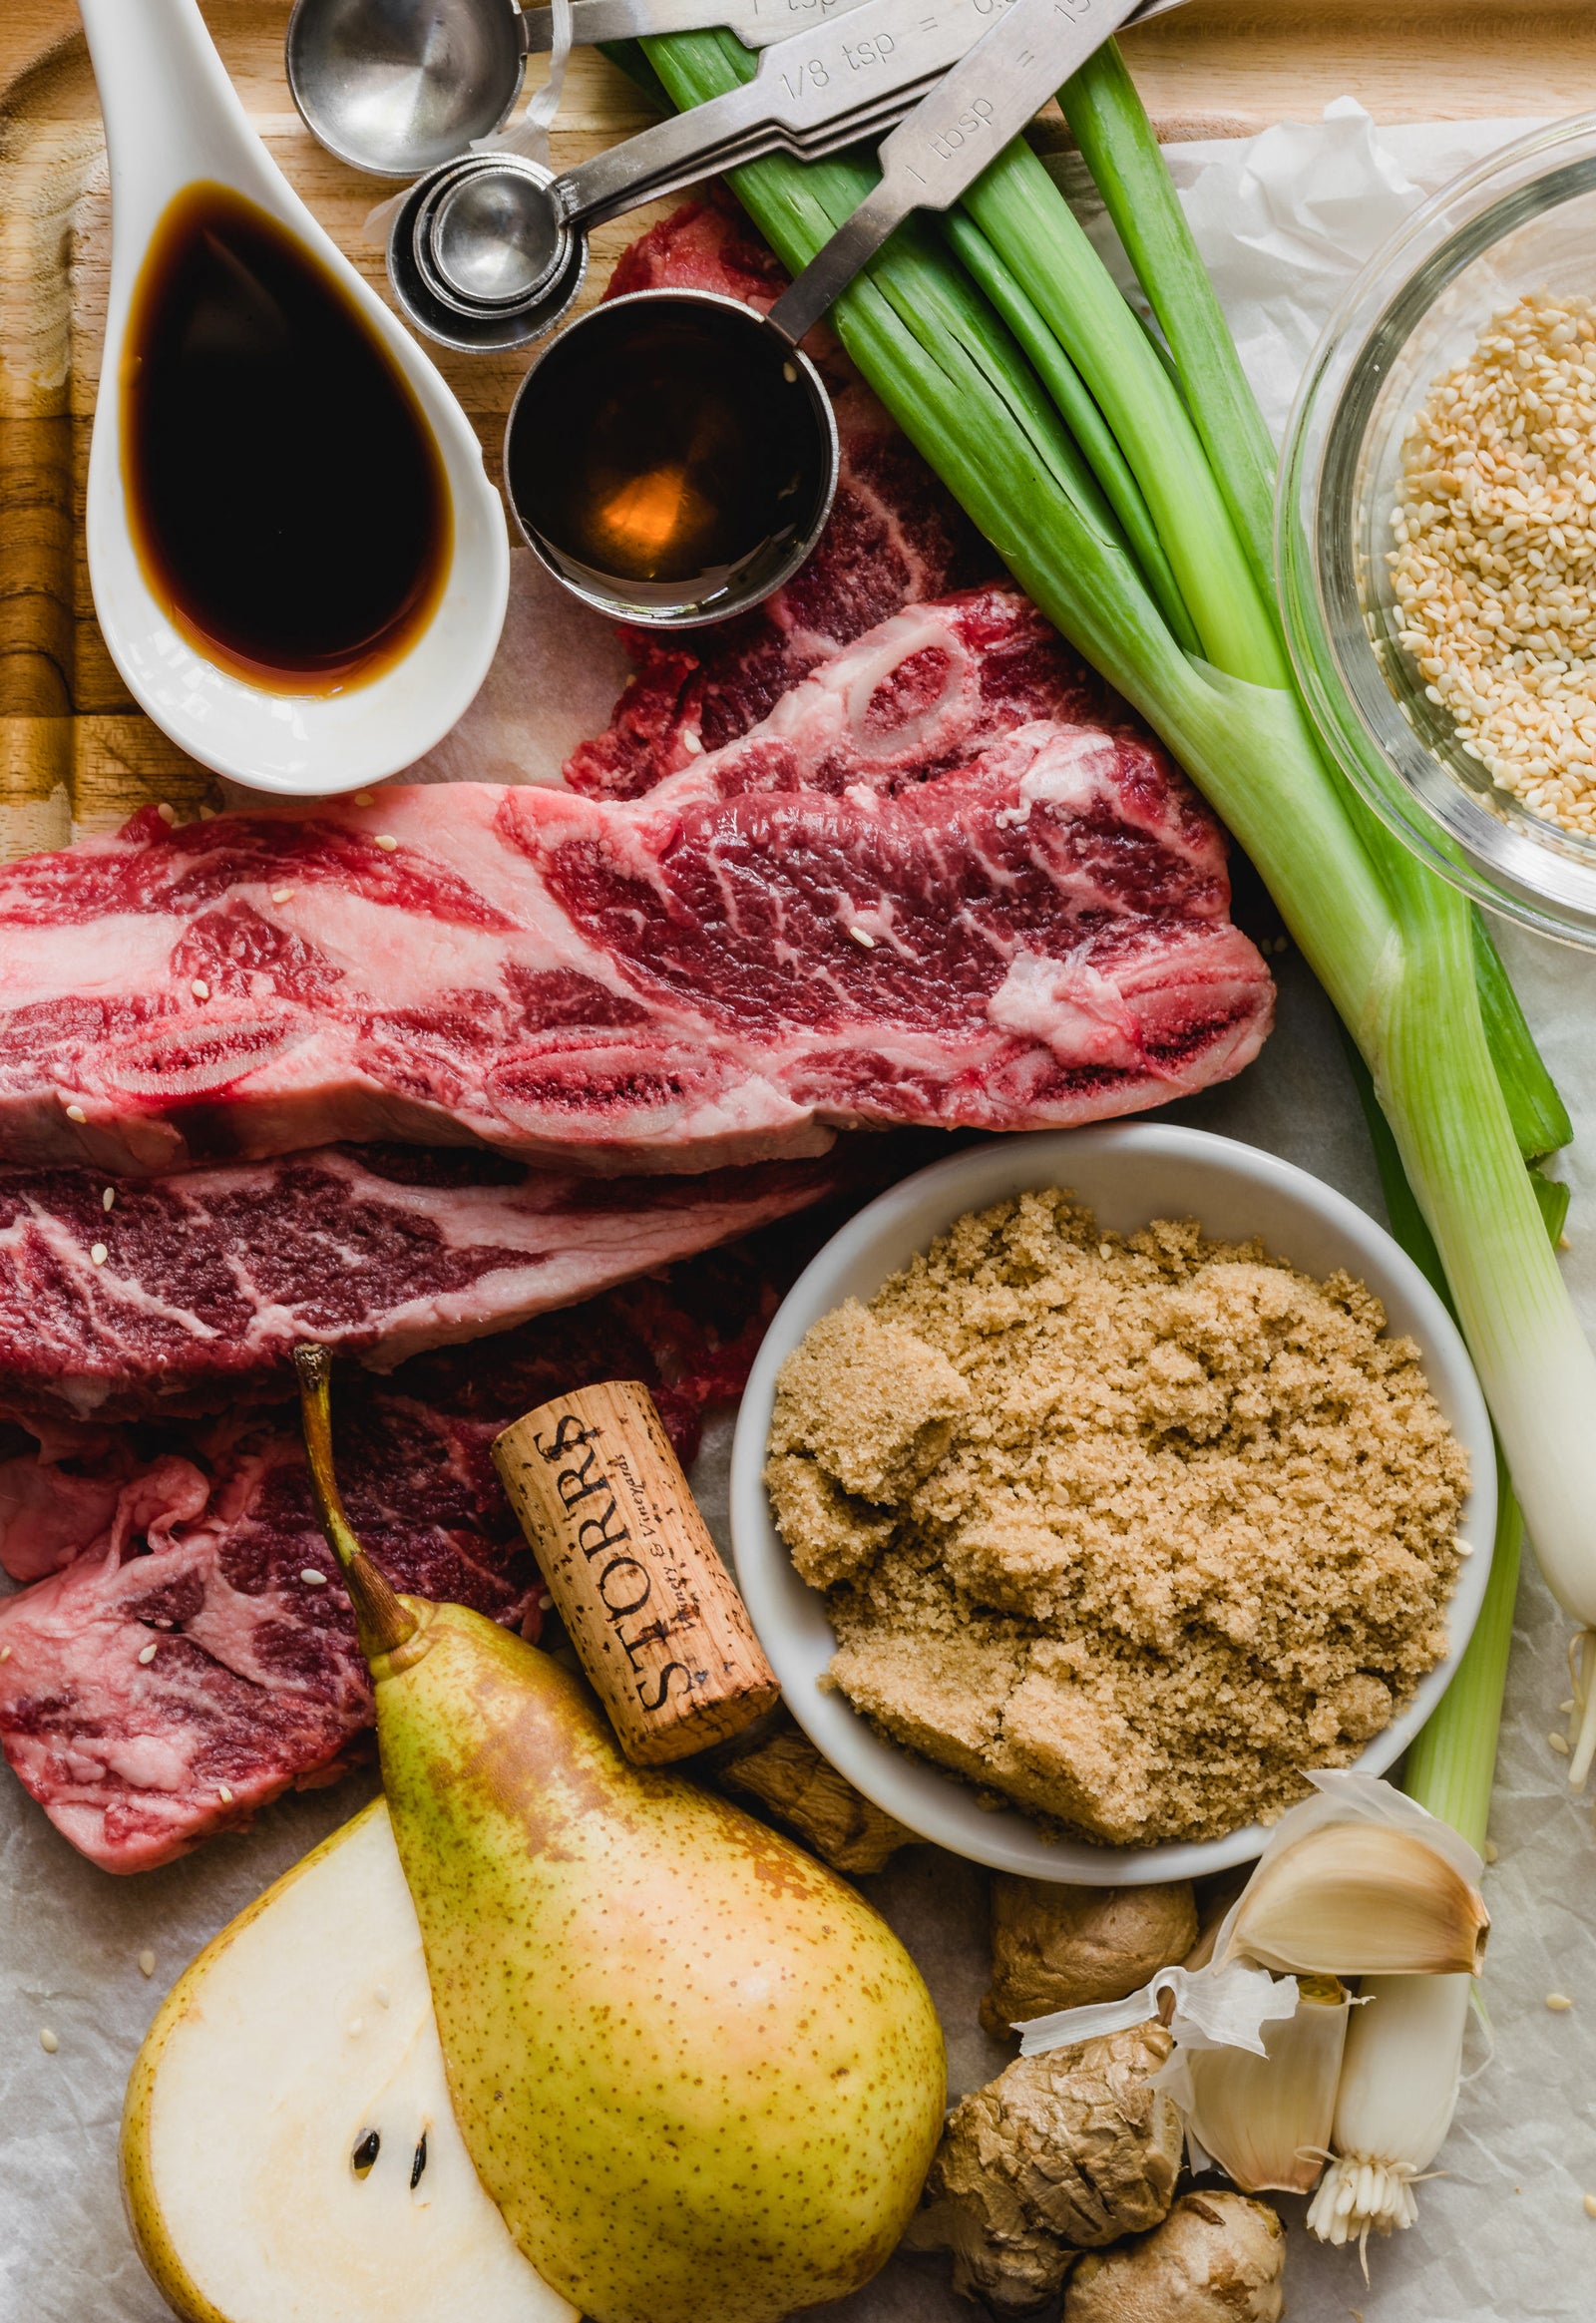 Ingredients for smoked short ribs recipe